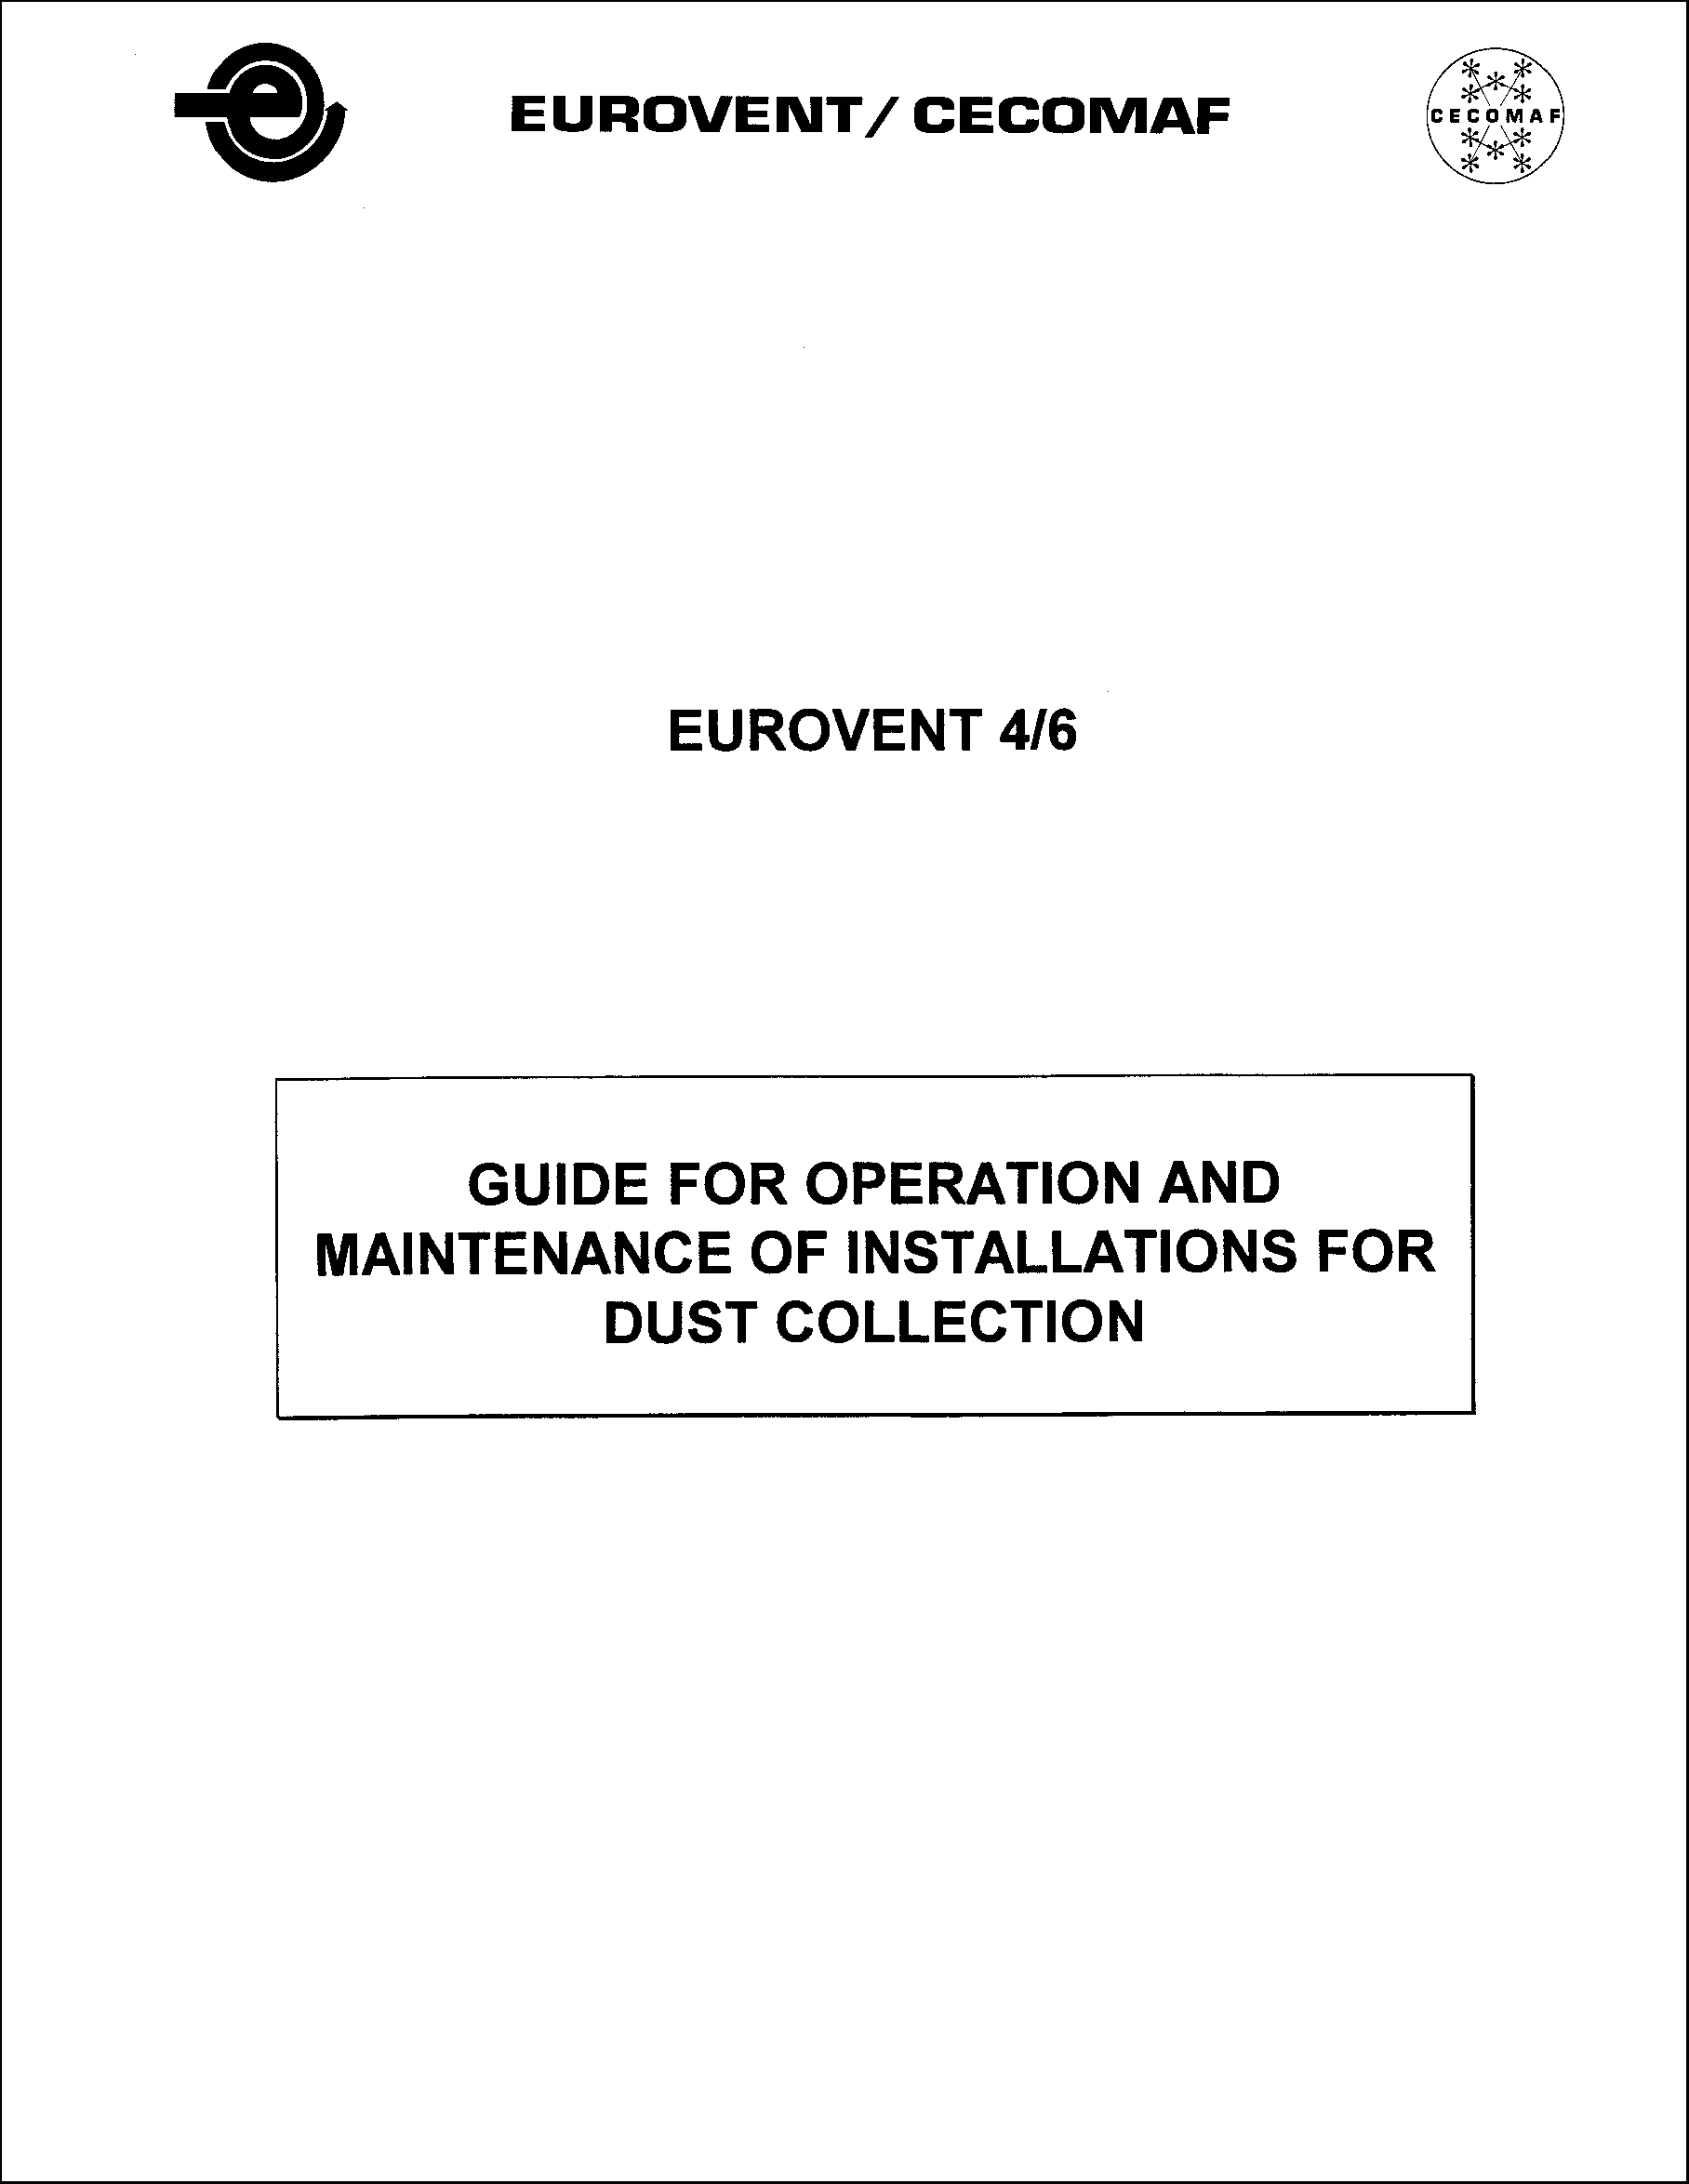 1991 - Guide for operation and maintenance of installations for dust collection